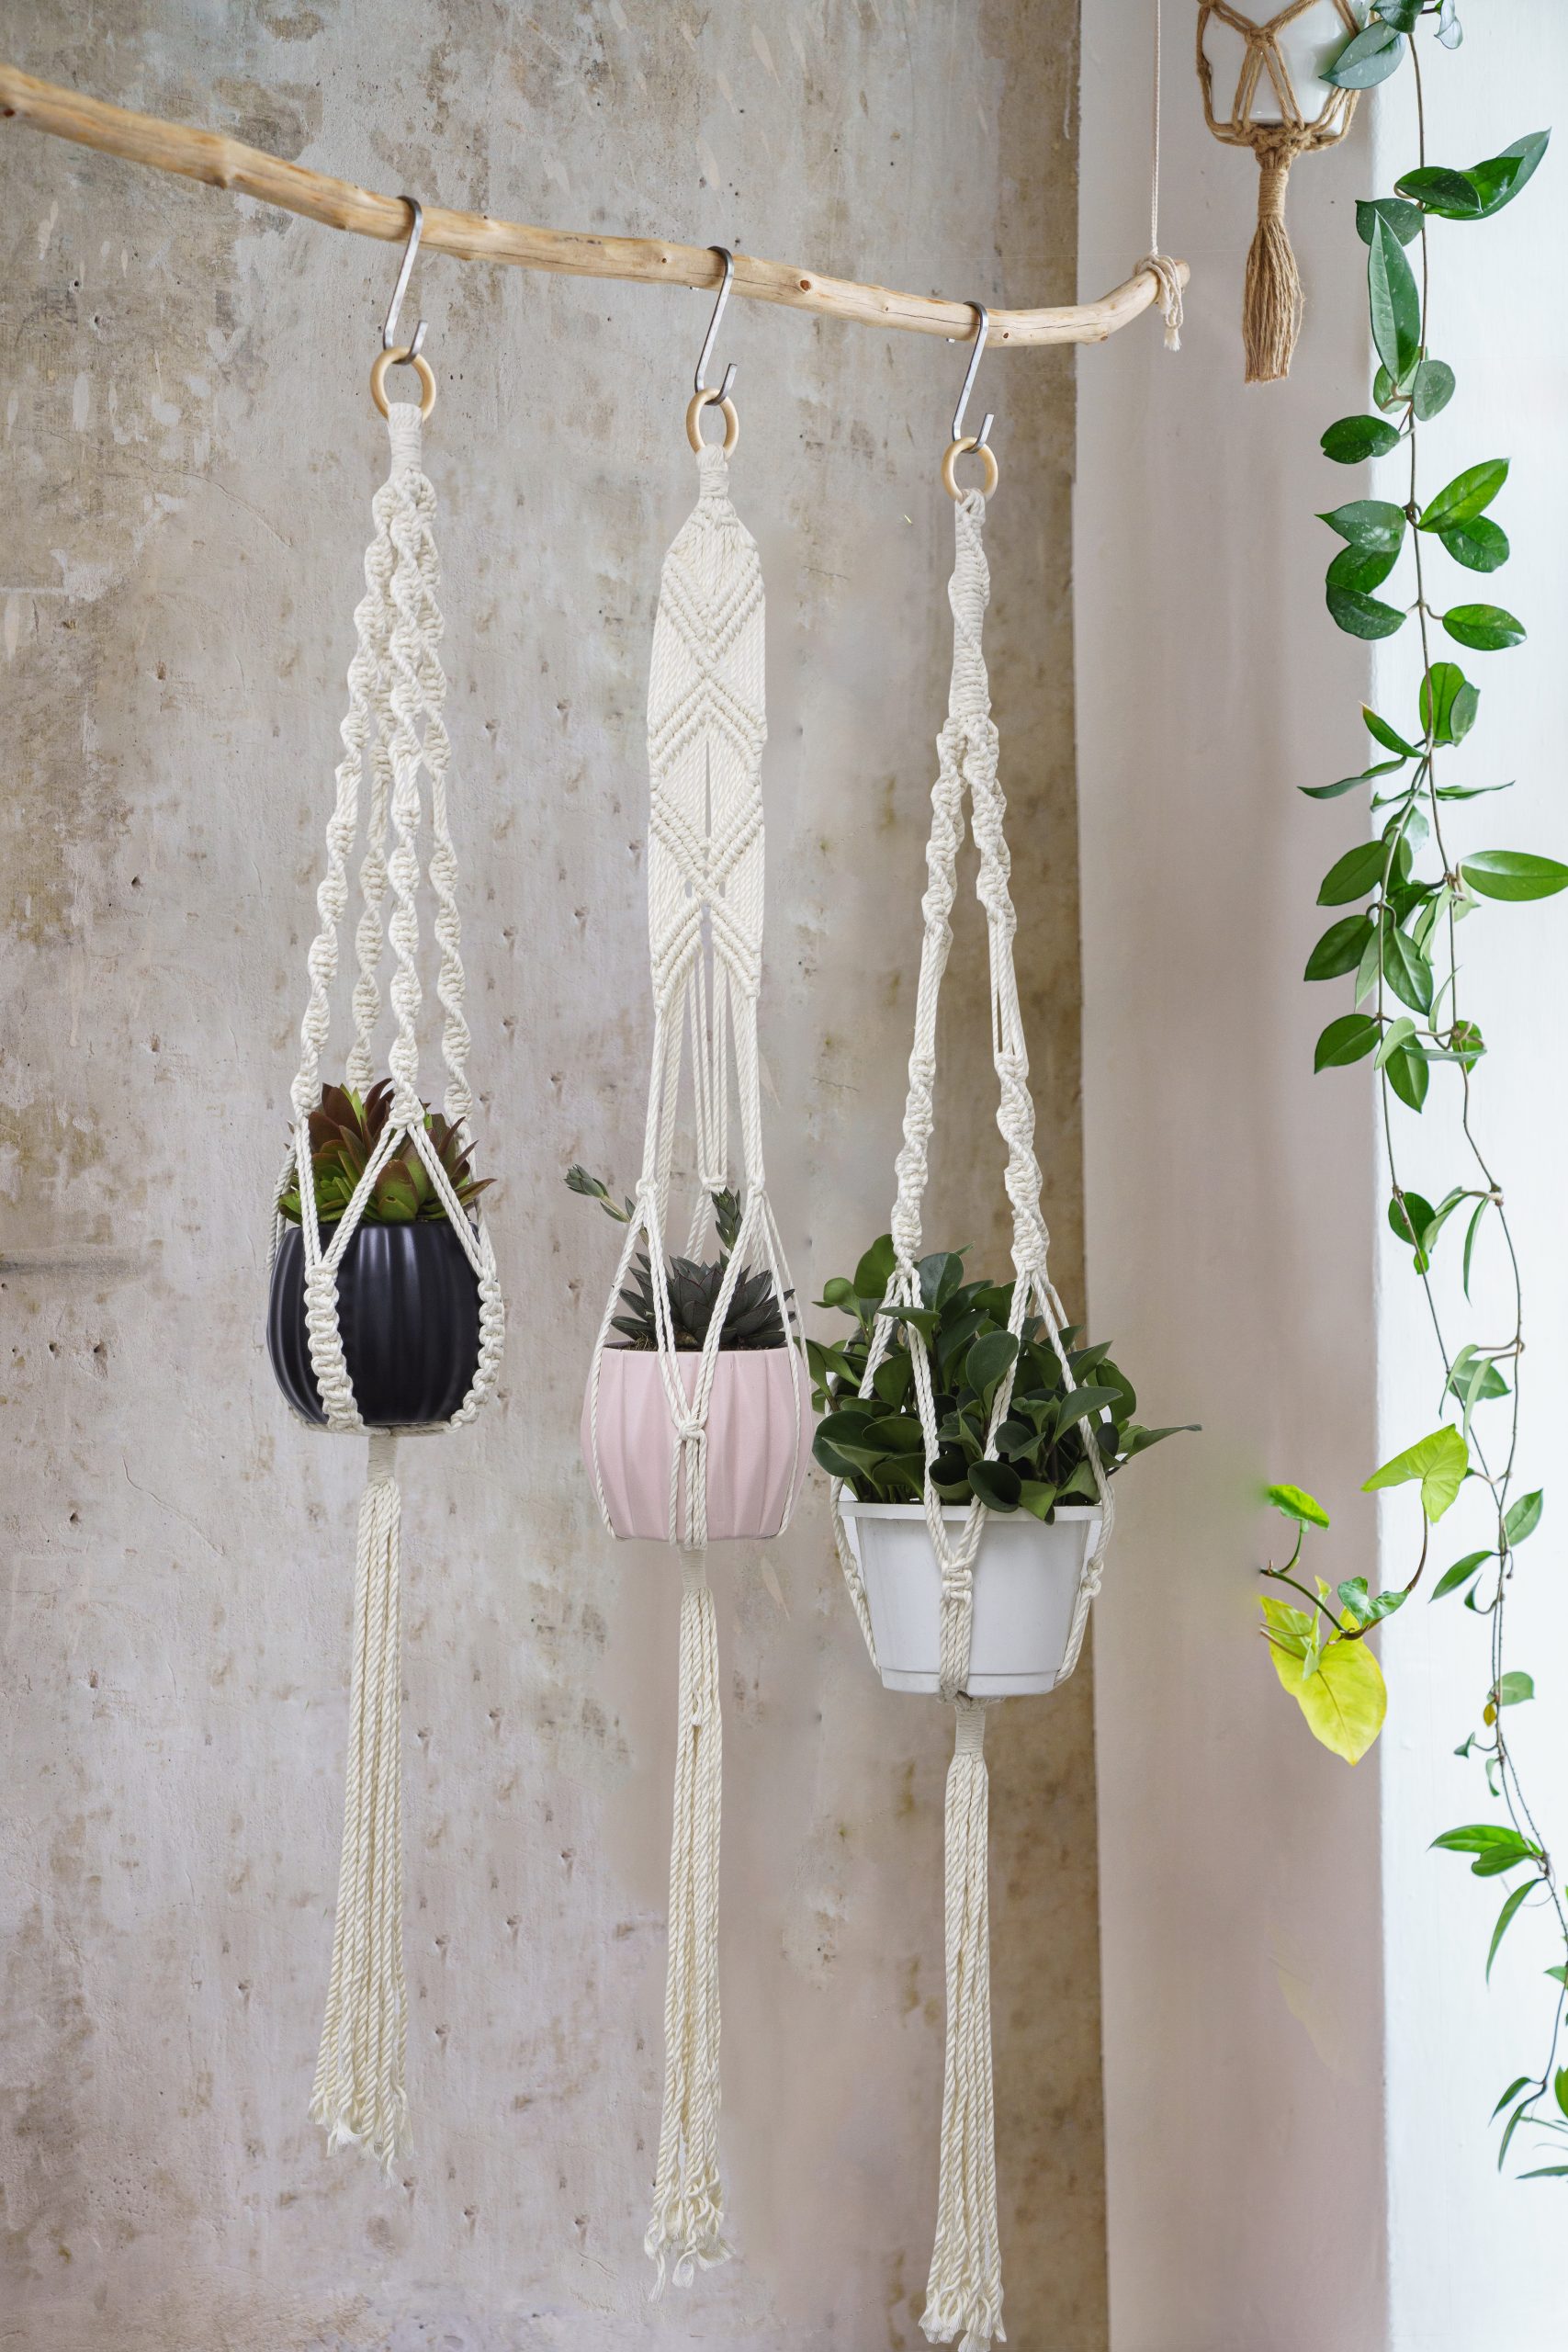 https://tdycorners.com/wp-content/uploads/TDy-Corners-Set-Of-5-Macrame-Plant-Hangers-With-5-Hooks-For-Gift-Home-Decoration-Vertical-Garden-With-Boho-Style-100-Cotton-Ivory-white-45-Inches-In-Length-5-Styles-6-scaled.jpg